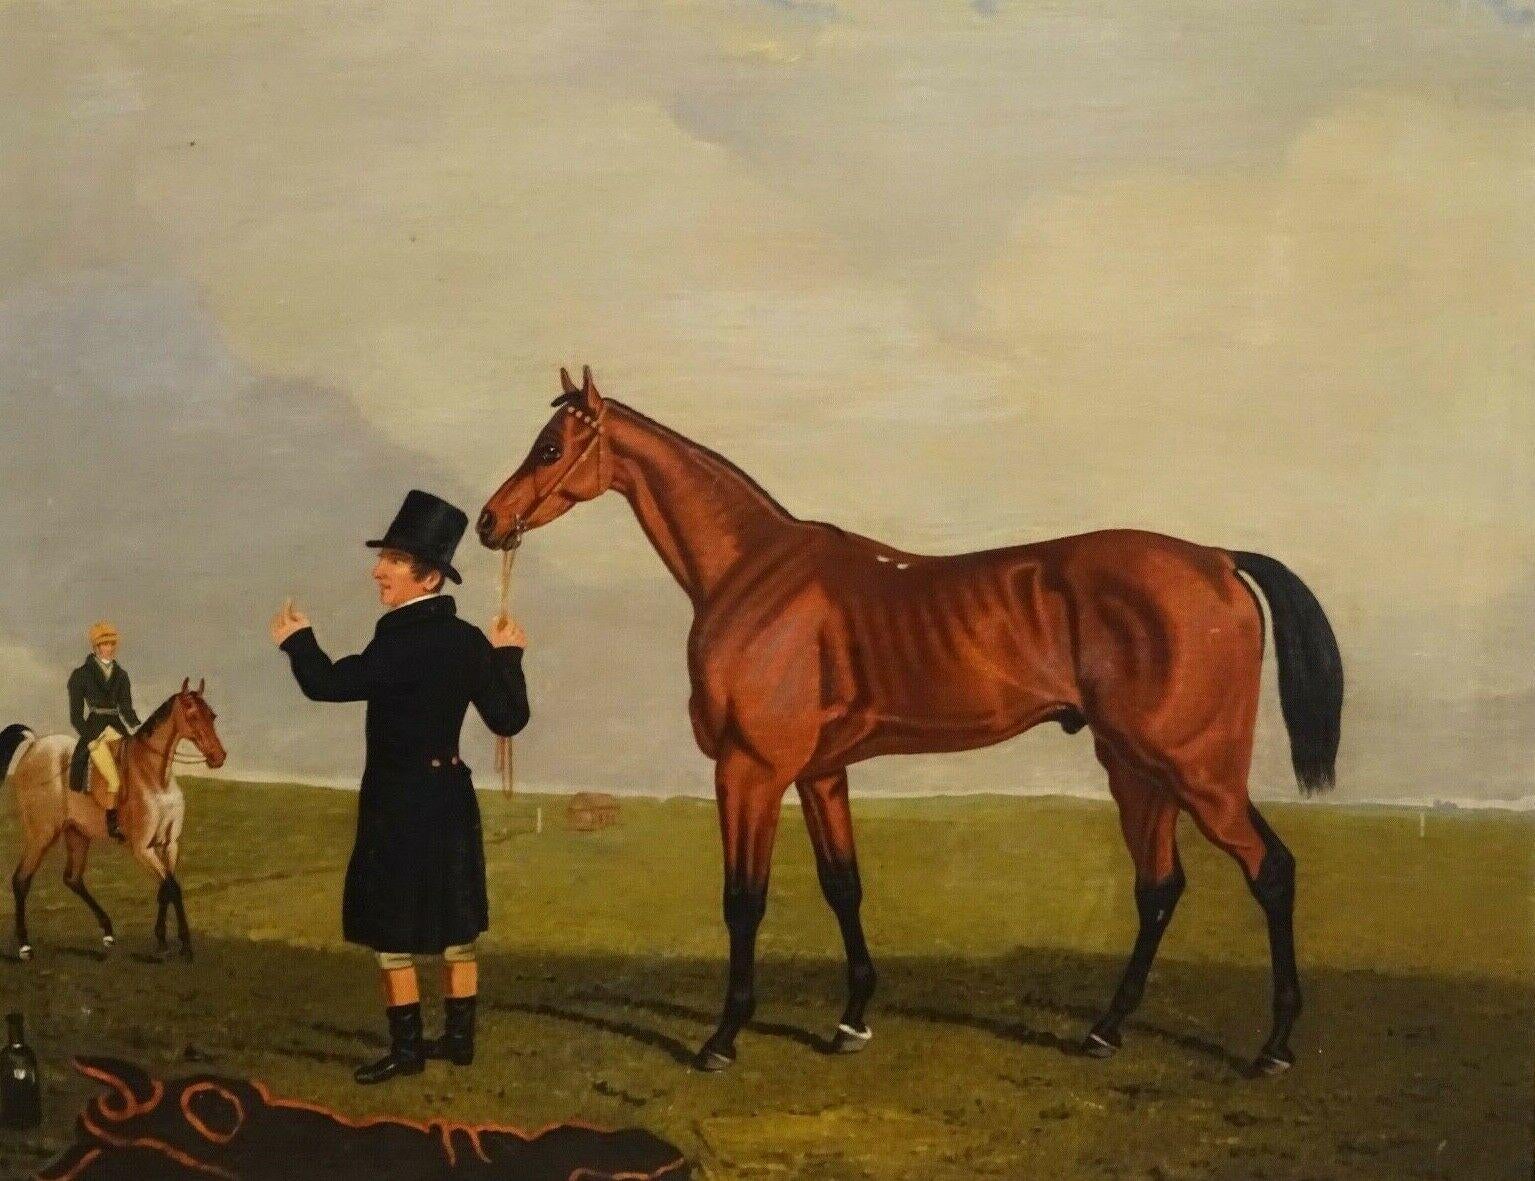 Portrait Of Archibald, with Owner Colonel Peel & Jockey, 19th Century - Painting by Lambert Marshall